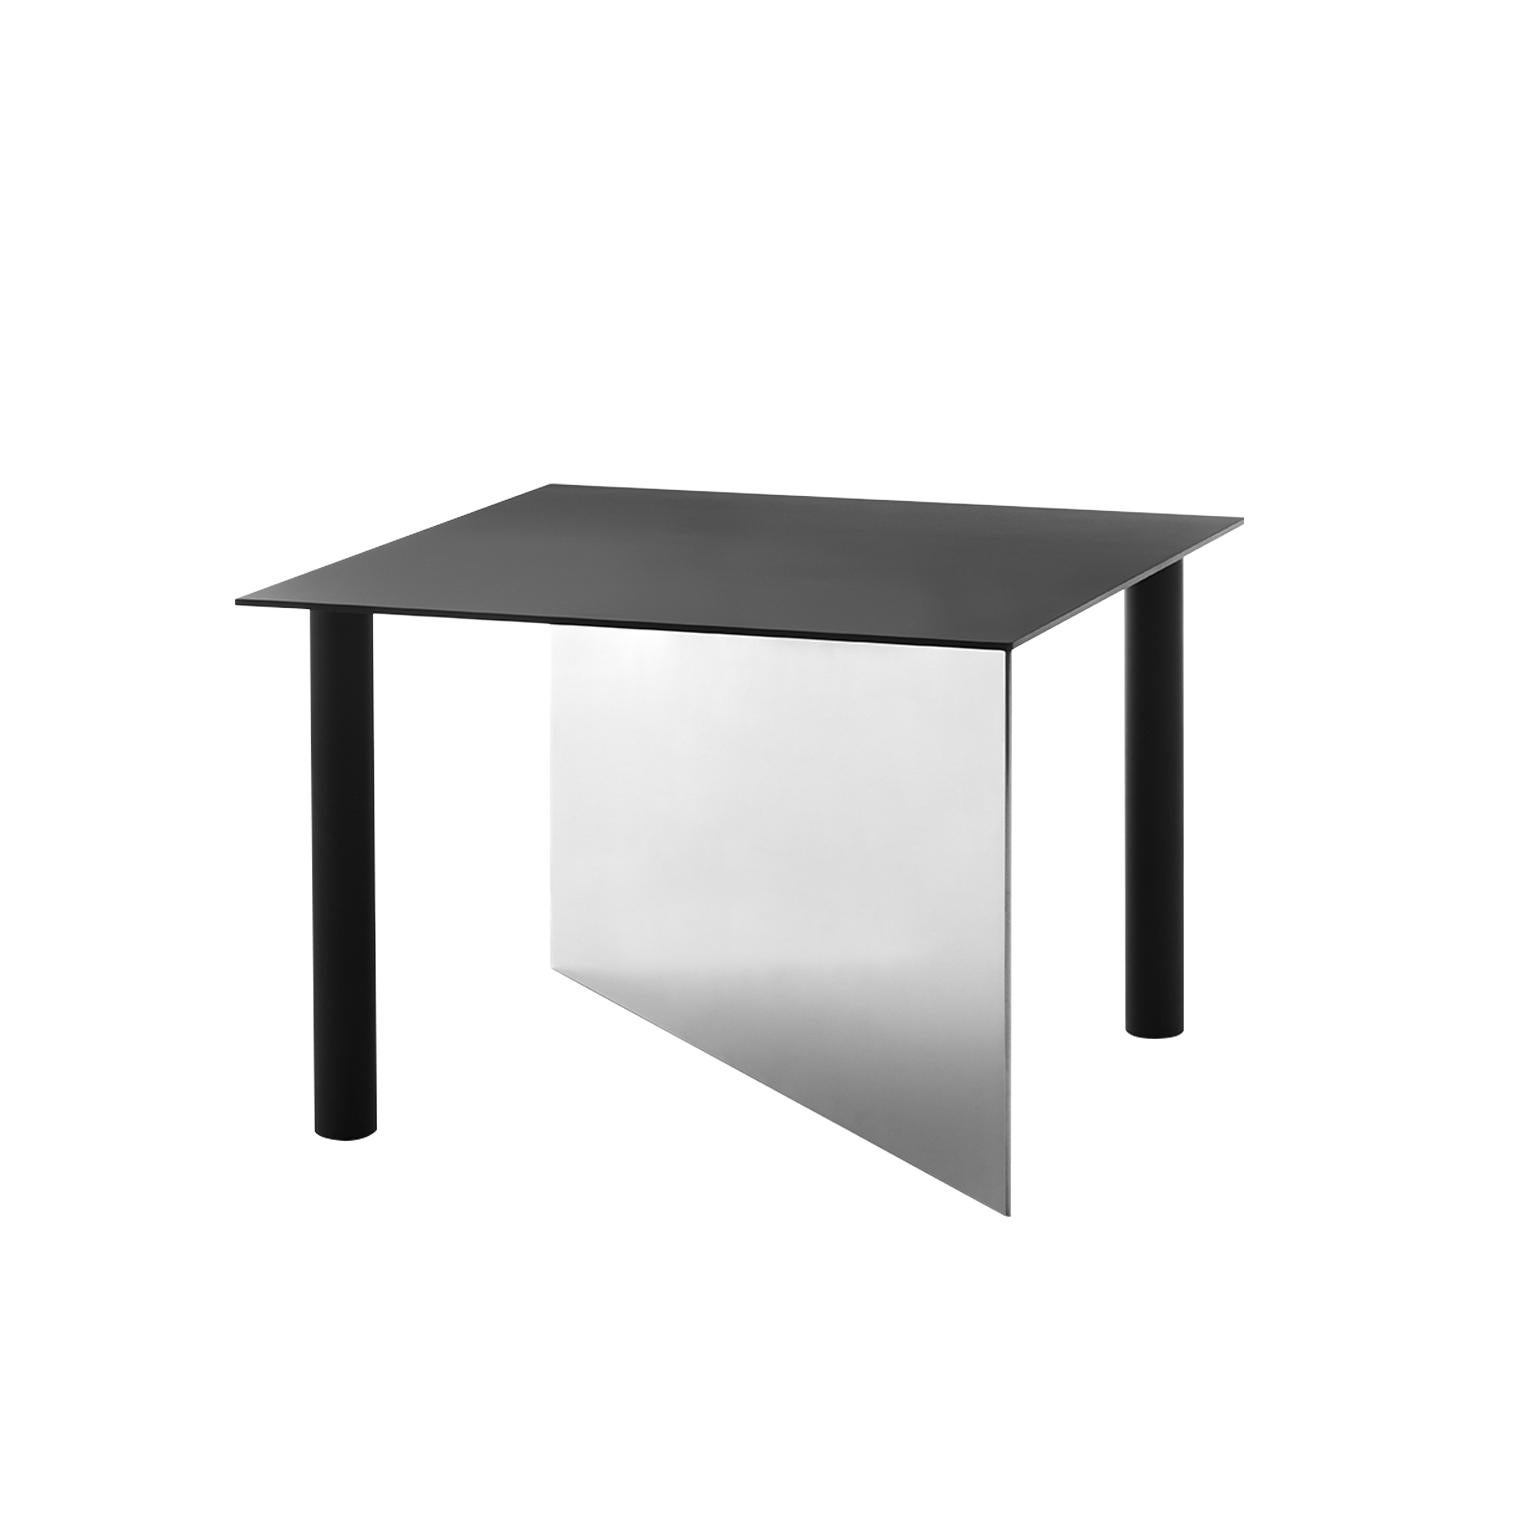 Piatto is a family of tables made from solid steel plate; despite the material, however, the objects look light. The range includes small side tables, large coffee tables, and tall display tables. Piatto tables are perhaps familiar – the angles,